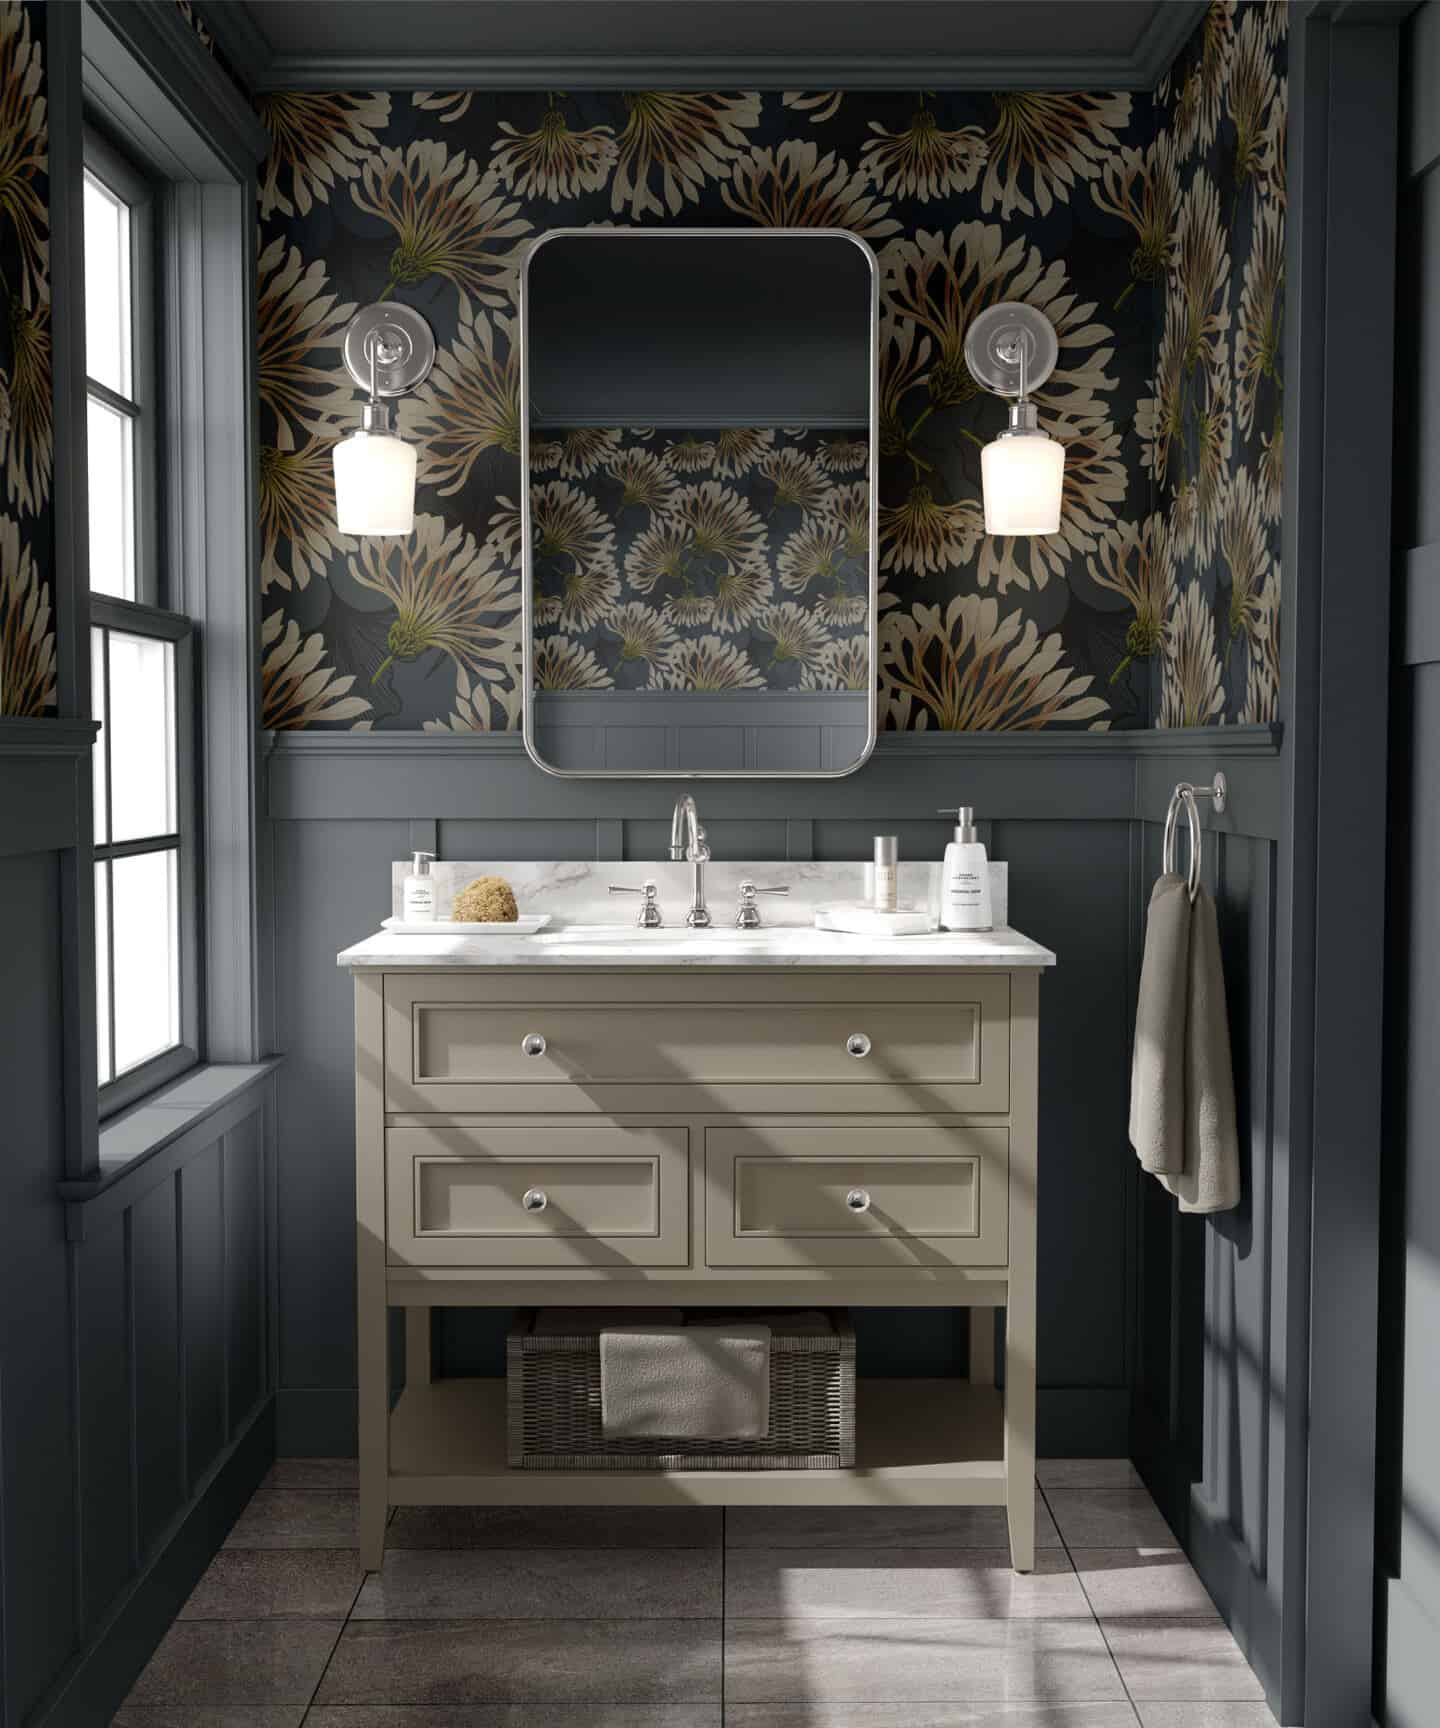 A washbasin with mirror above in a grey bathroom with wall panelling on the lower half of the wall and botanical wallpaper above. 